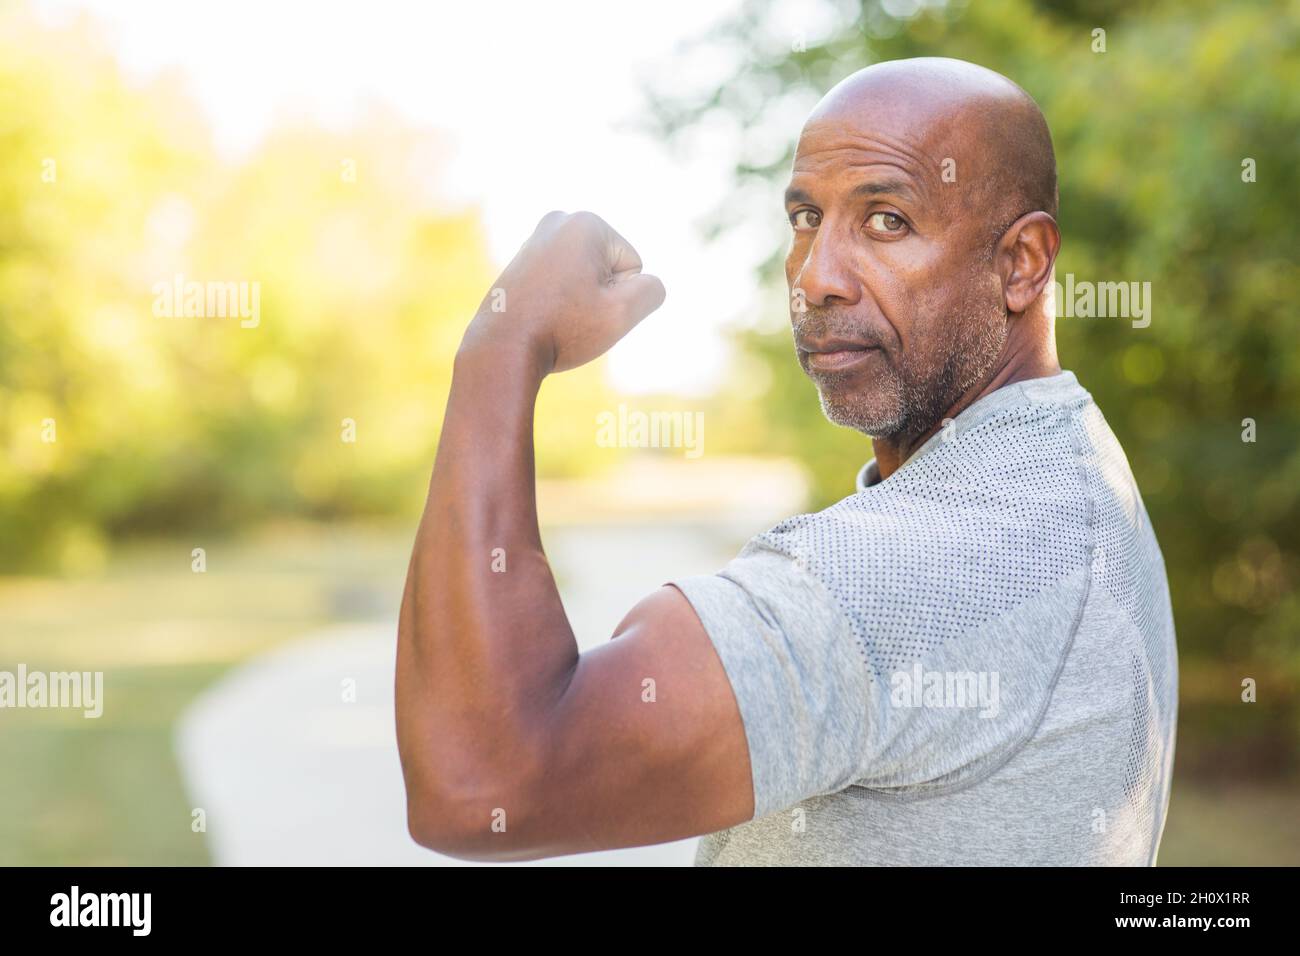 Mature African American flexing his bicep muscle. Stock Photo